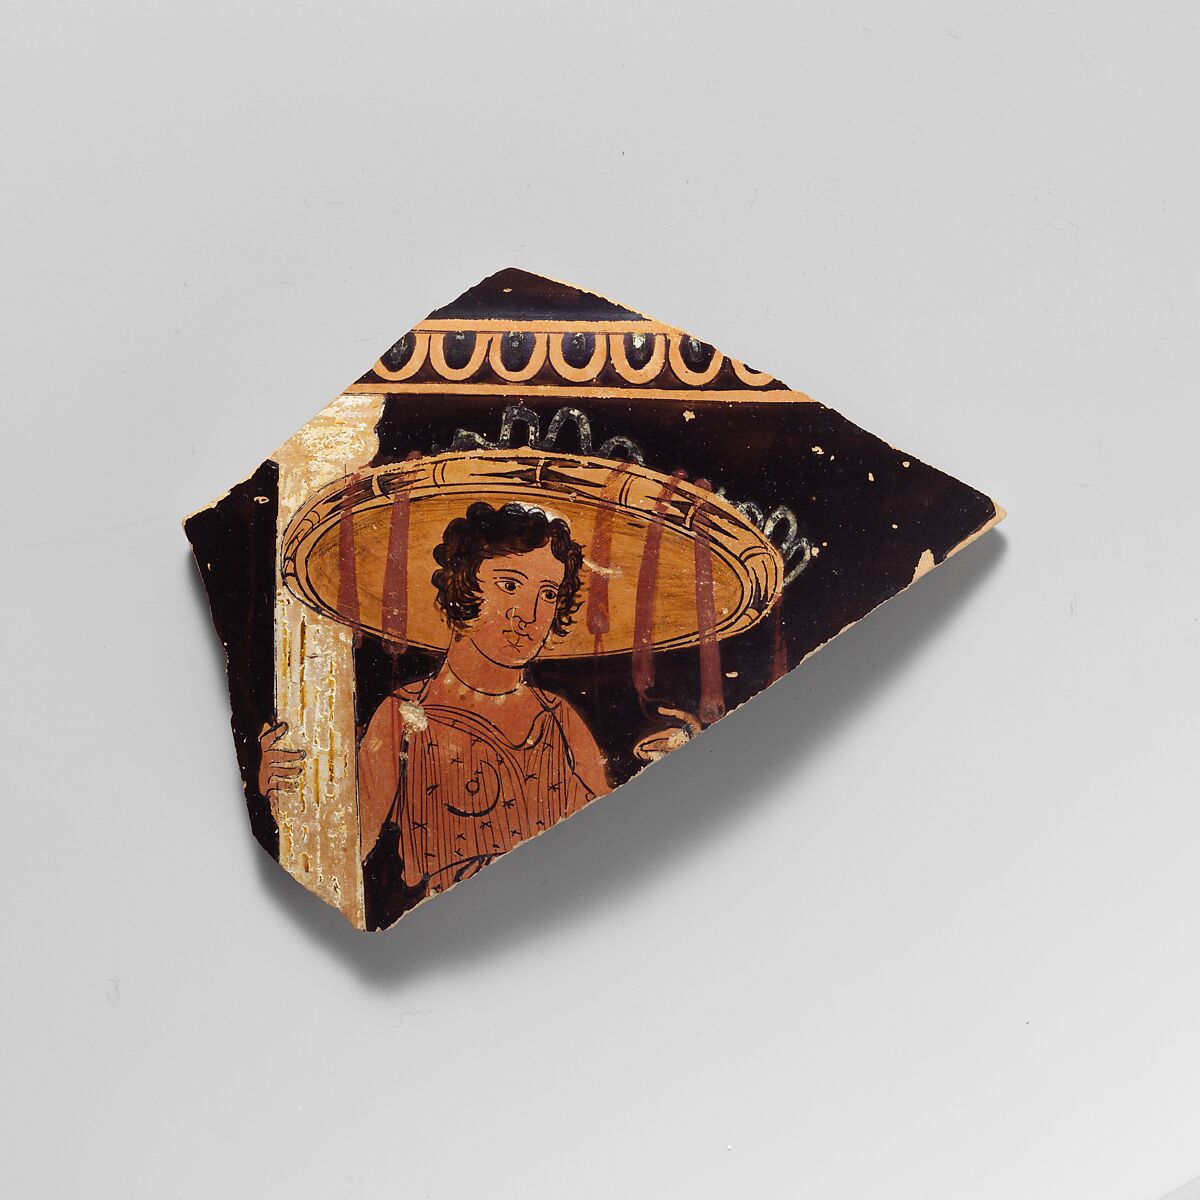 Fragment of a terracotta neck-amphora (jar), Attributed to the Painter of the Geneva Orestes, Terracotta, Greek, South Italian, Paestan 